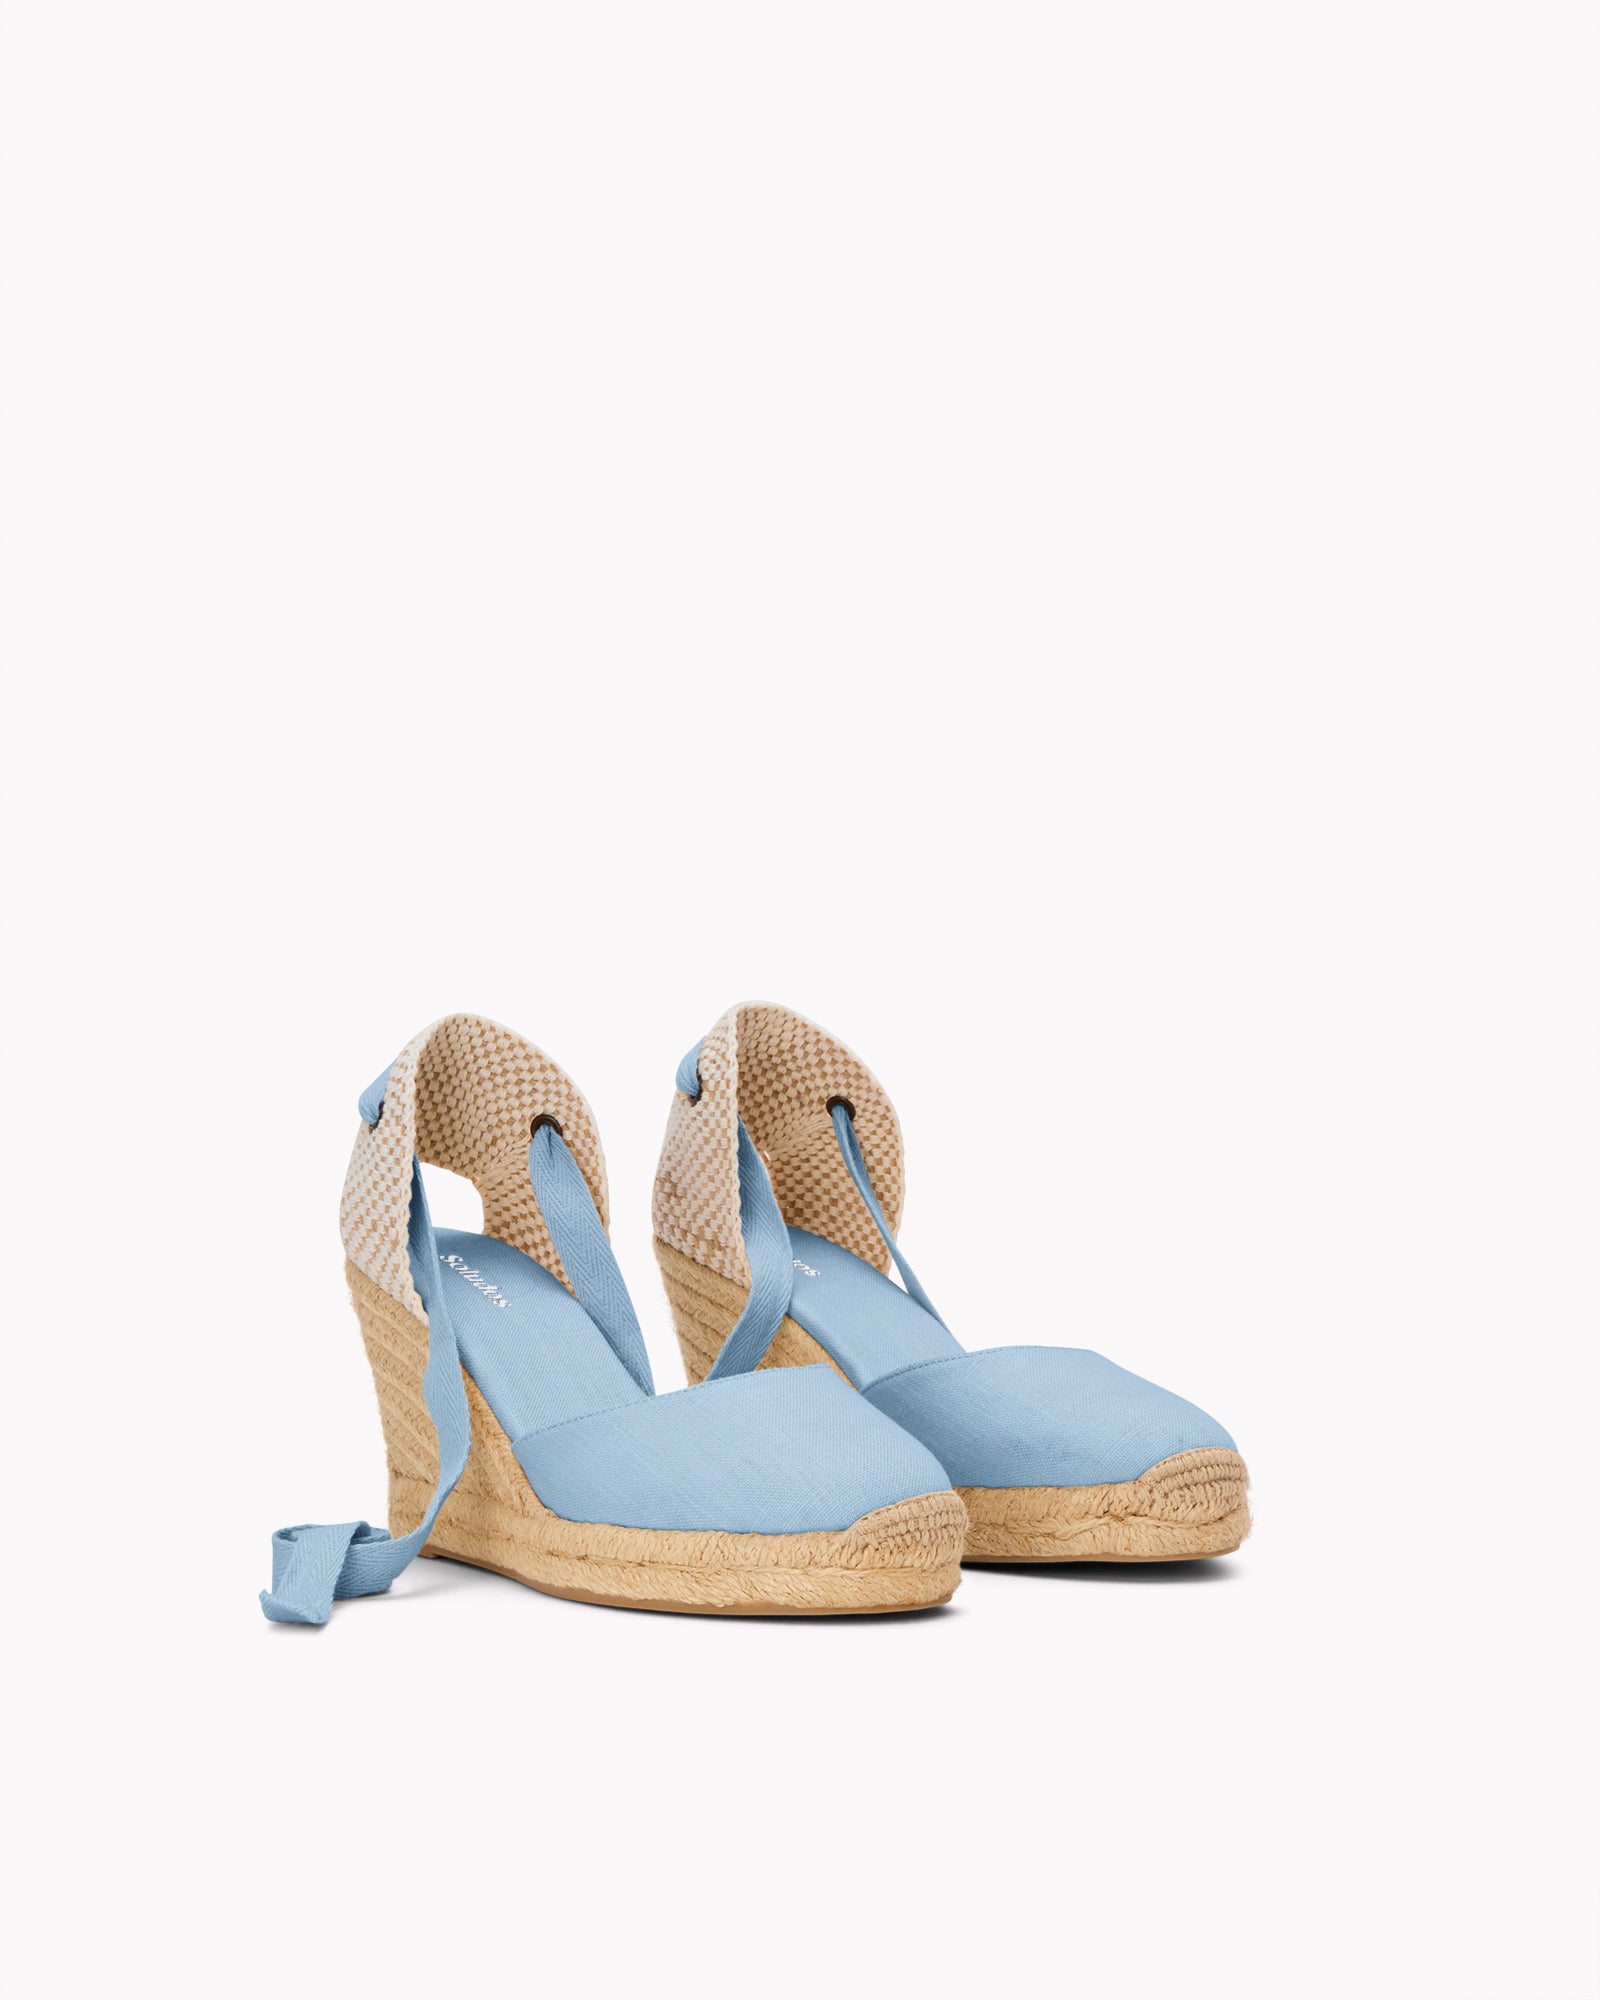 The Marseille Wedge - Classic - Dolphin Blue